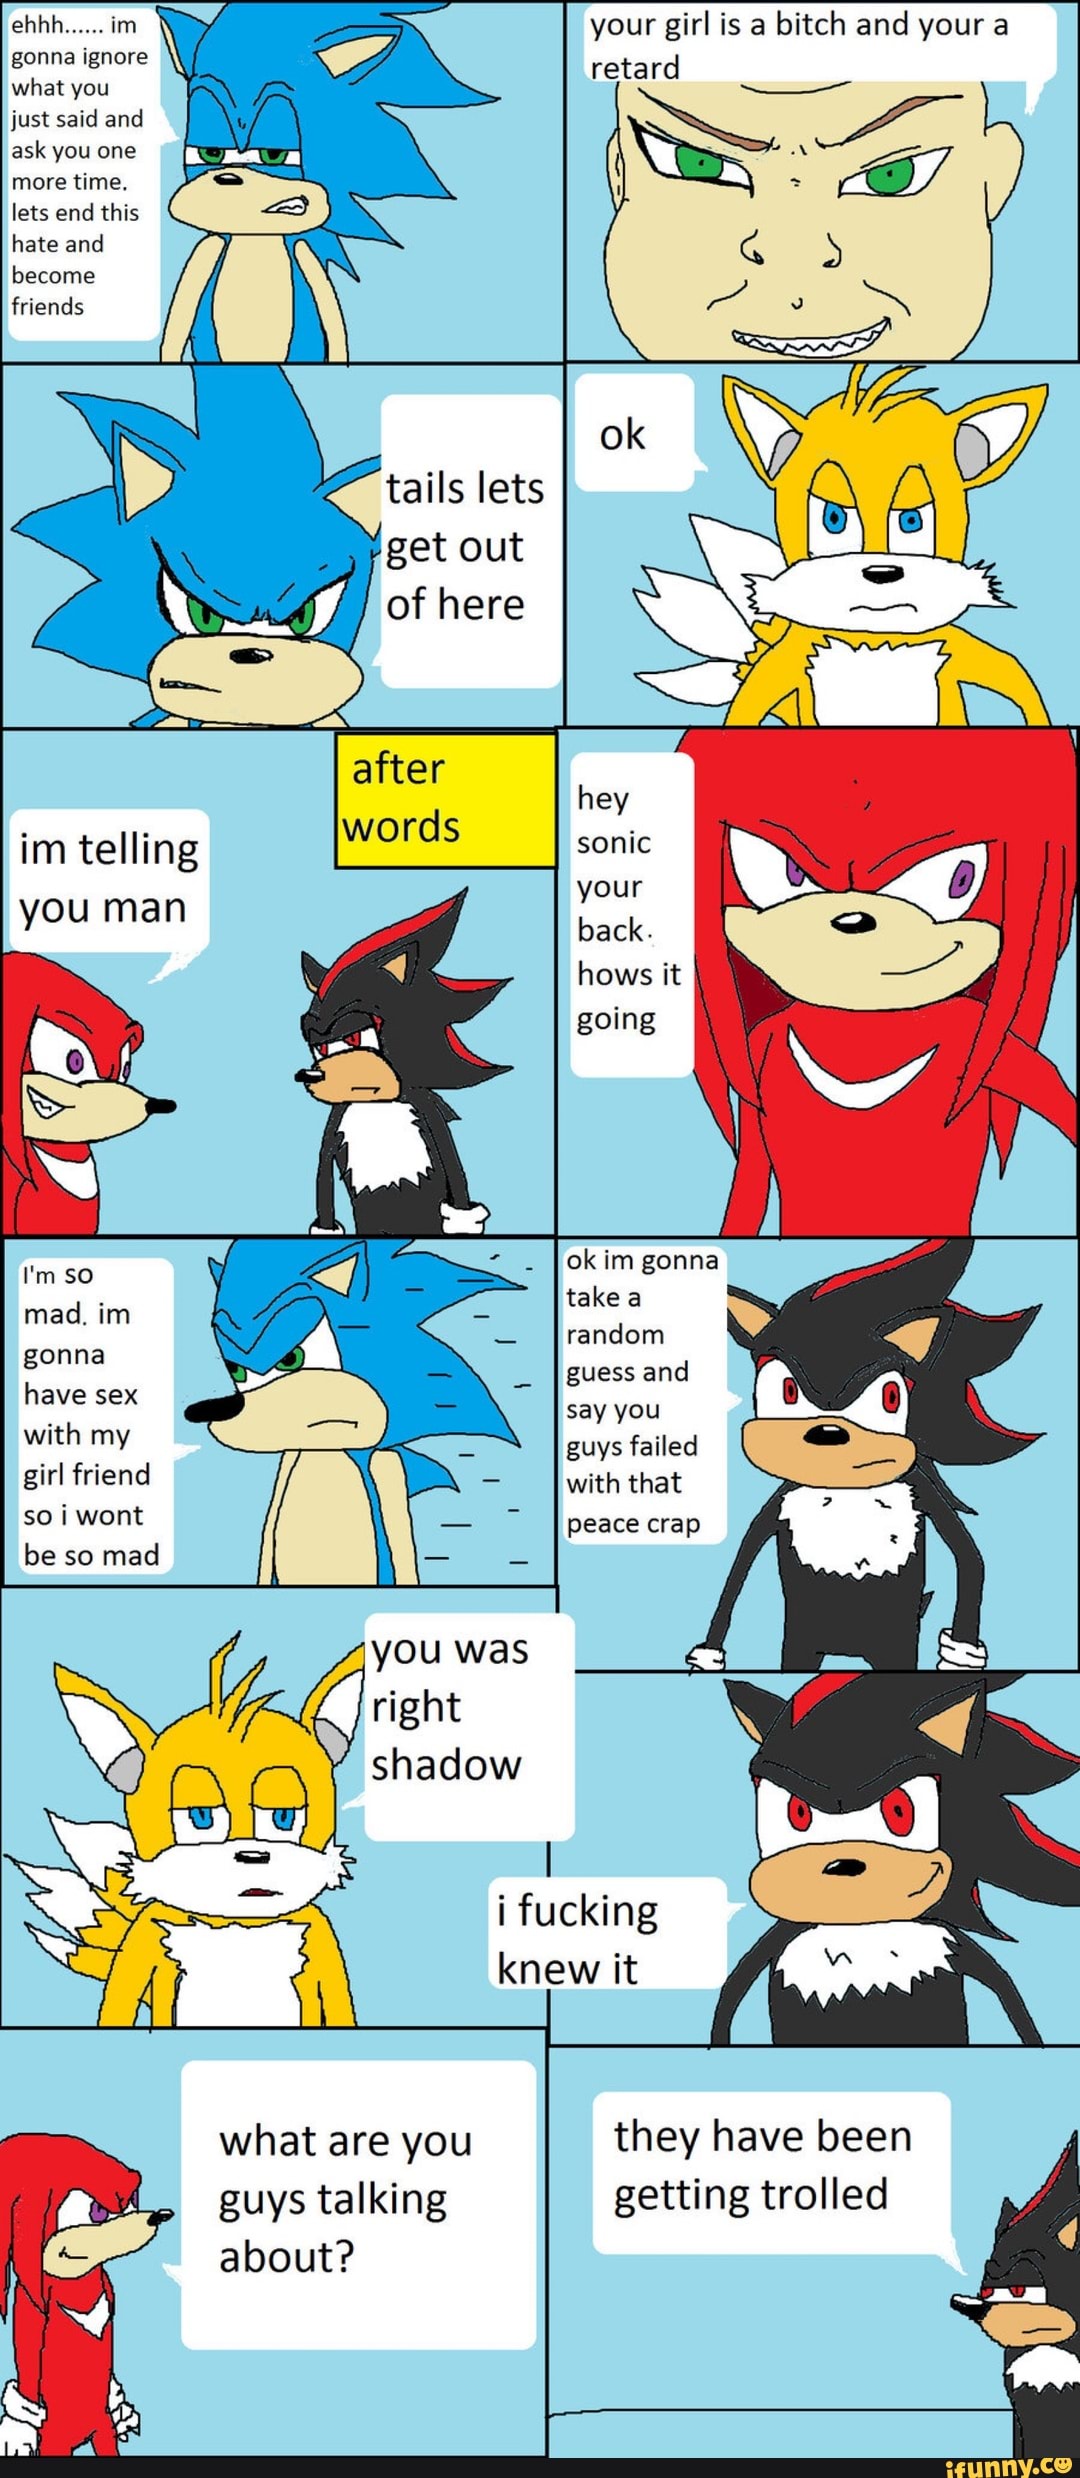 Tails gets trolled” pg.5 pic